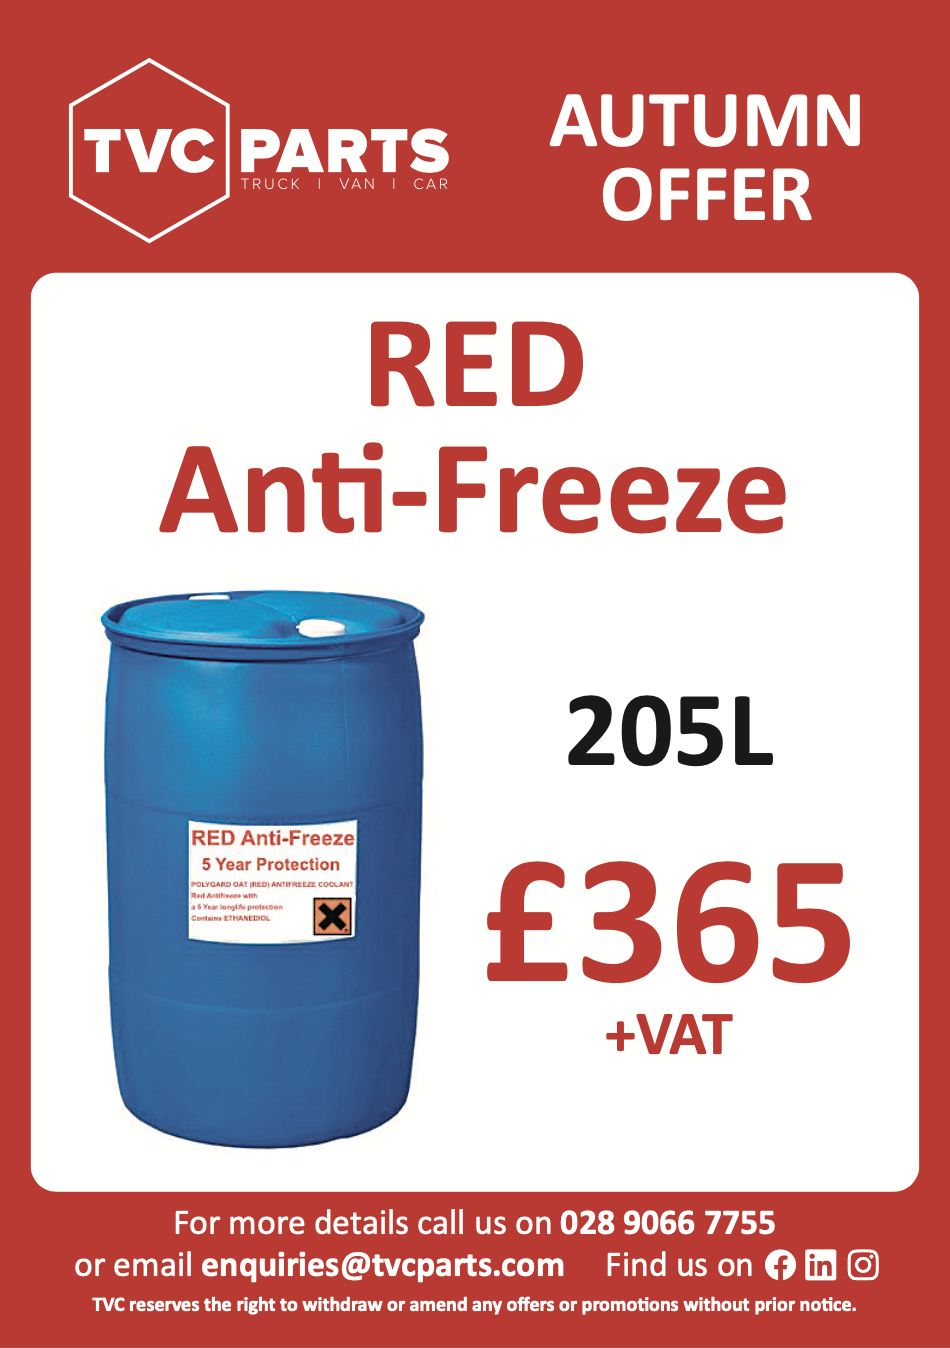 RED Anti-Freeze Autumn Offer